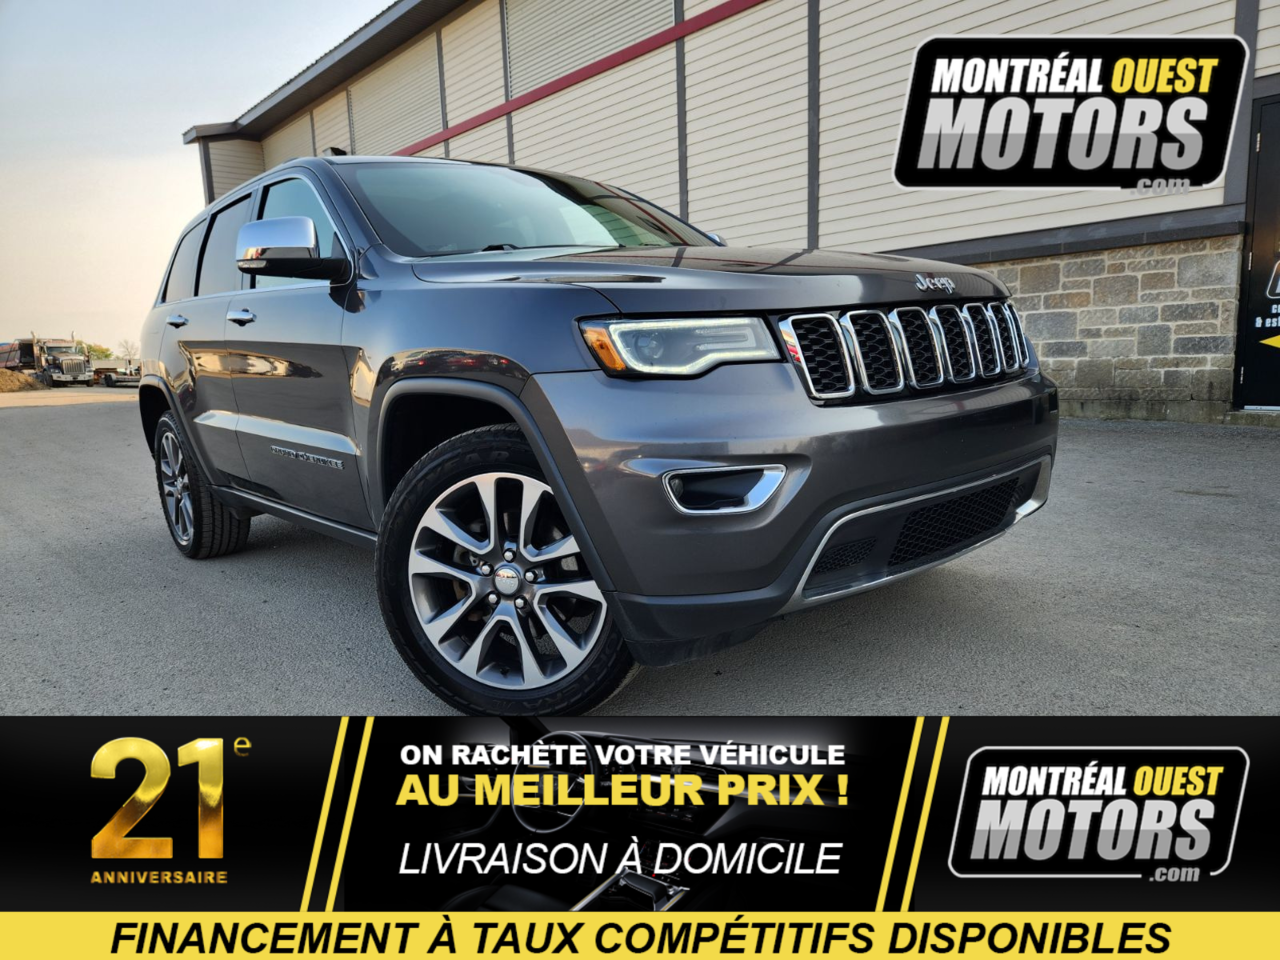 2018 Jeep Grand Cherokee LIMITED / Luxe Package / AWD / PANORAMIC ROOF 20''